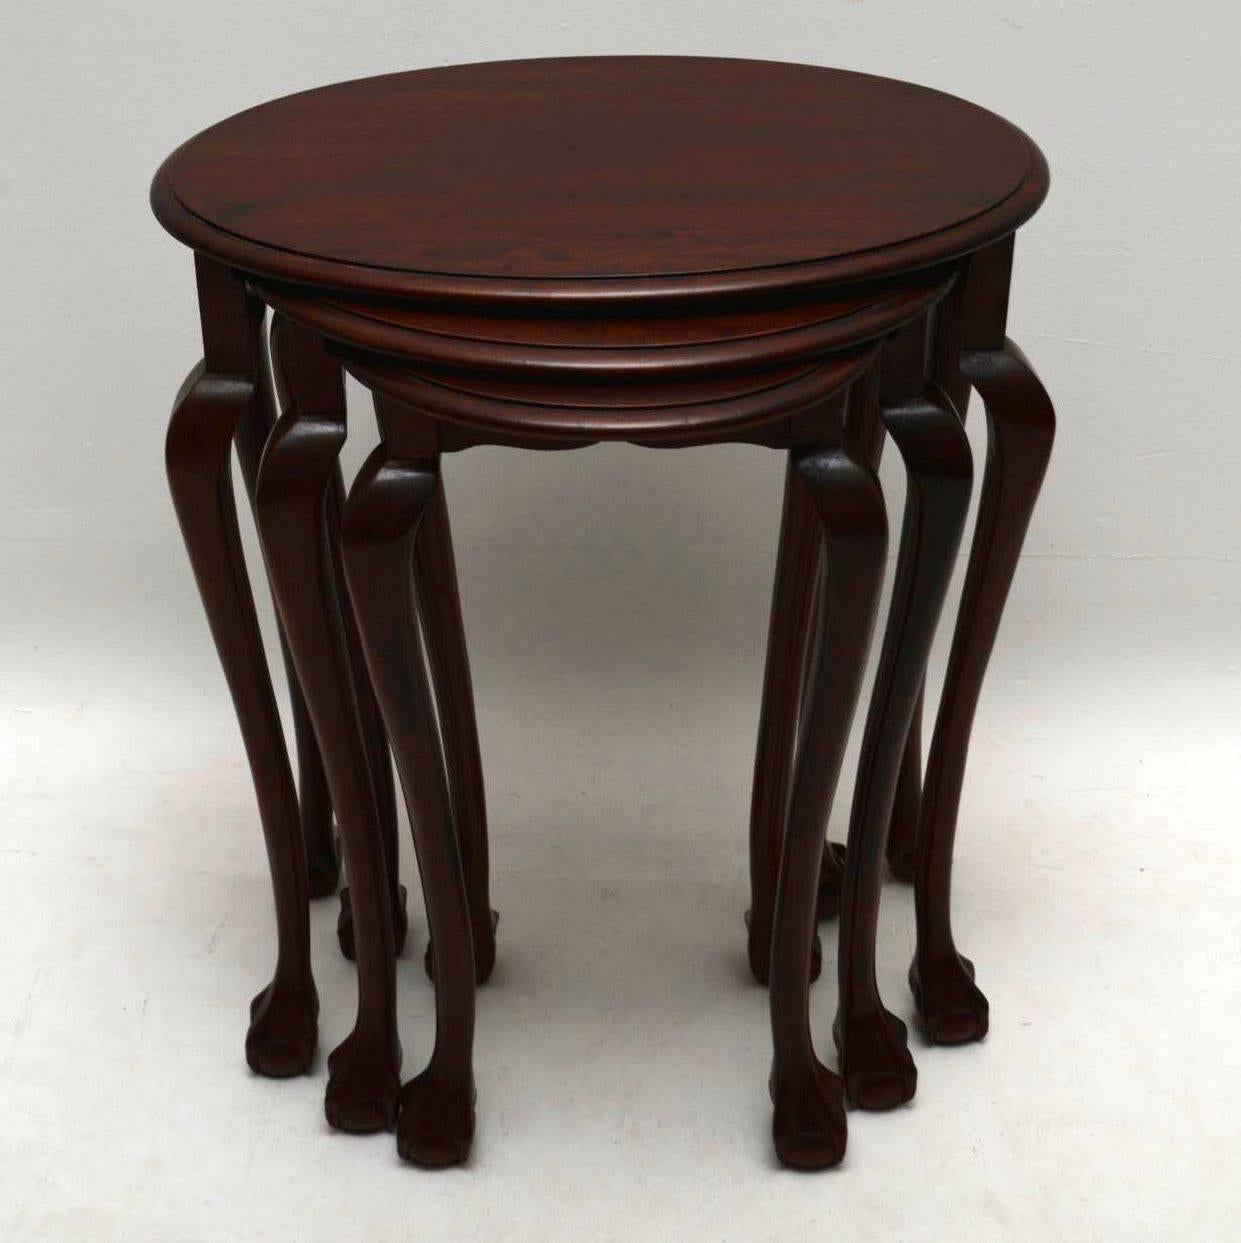 Antique Edwardian solid mahogany nest of three tables, with oval tops and well shaped legs with ball and claw feet. This nest is in good condition throughout and the tables have all been French polished. They date from the 1900-1910